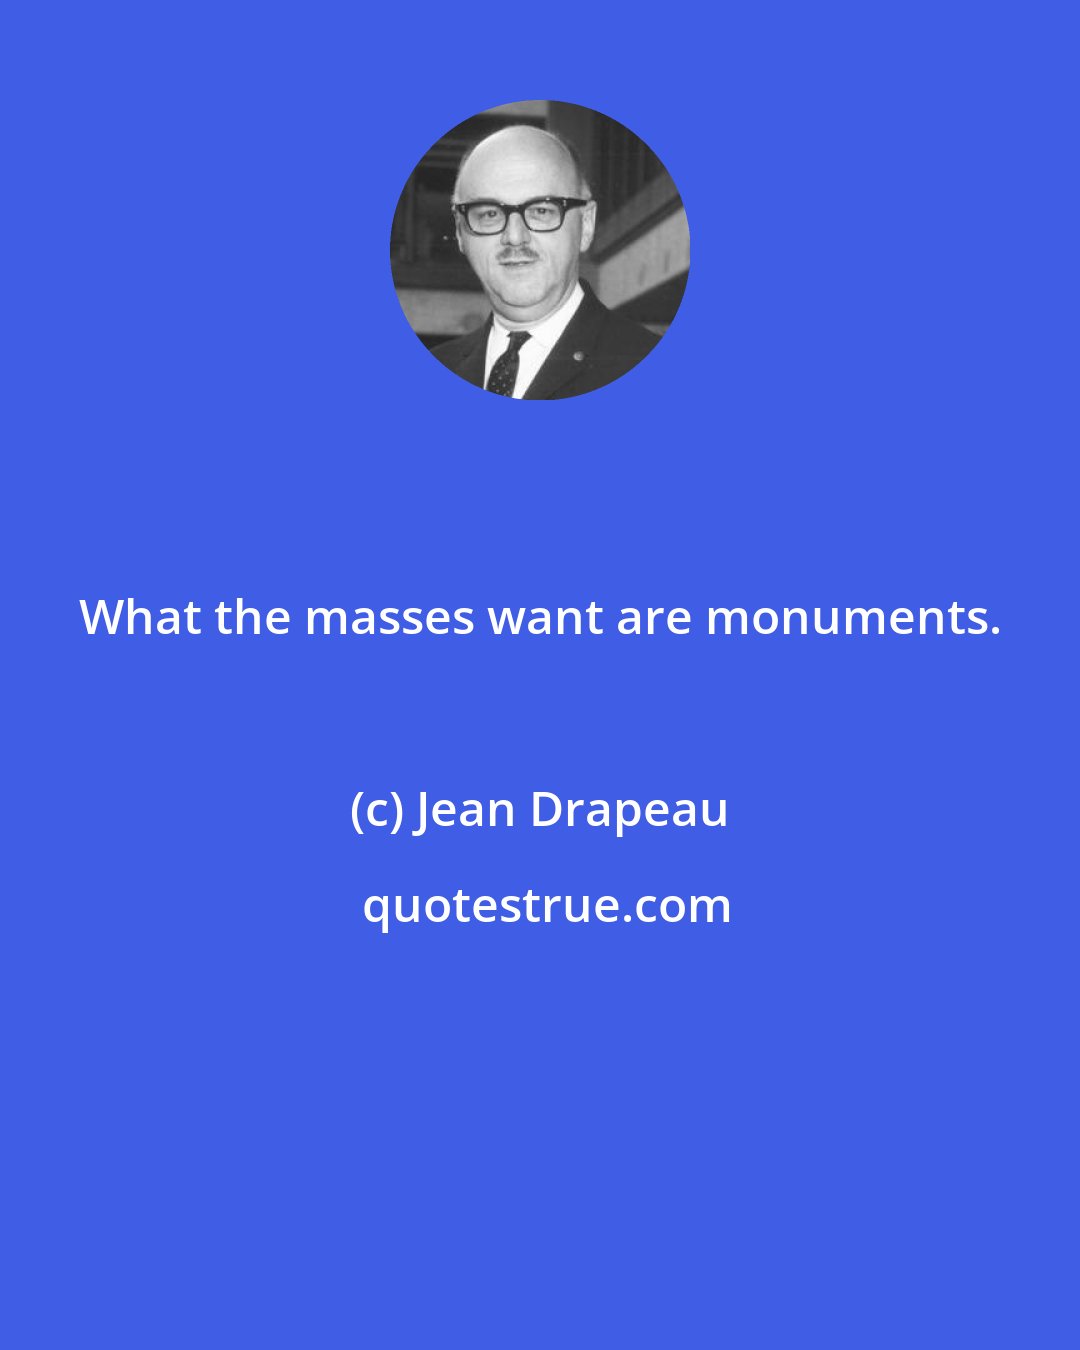 Jean Drapeau: What the masses want are monuments.